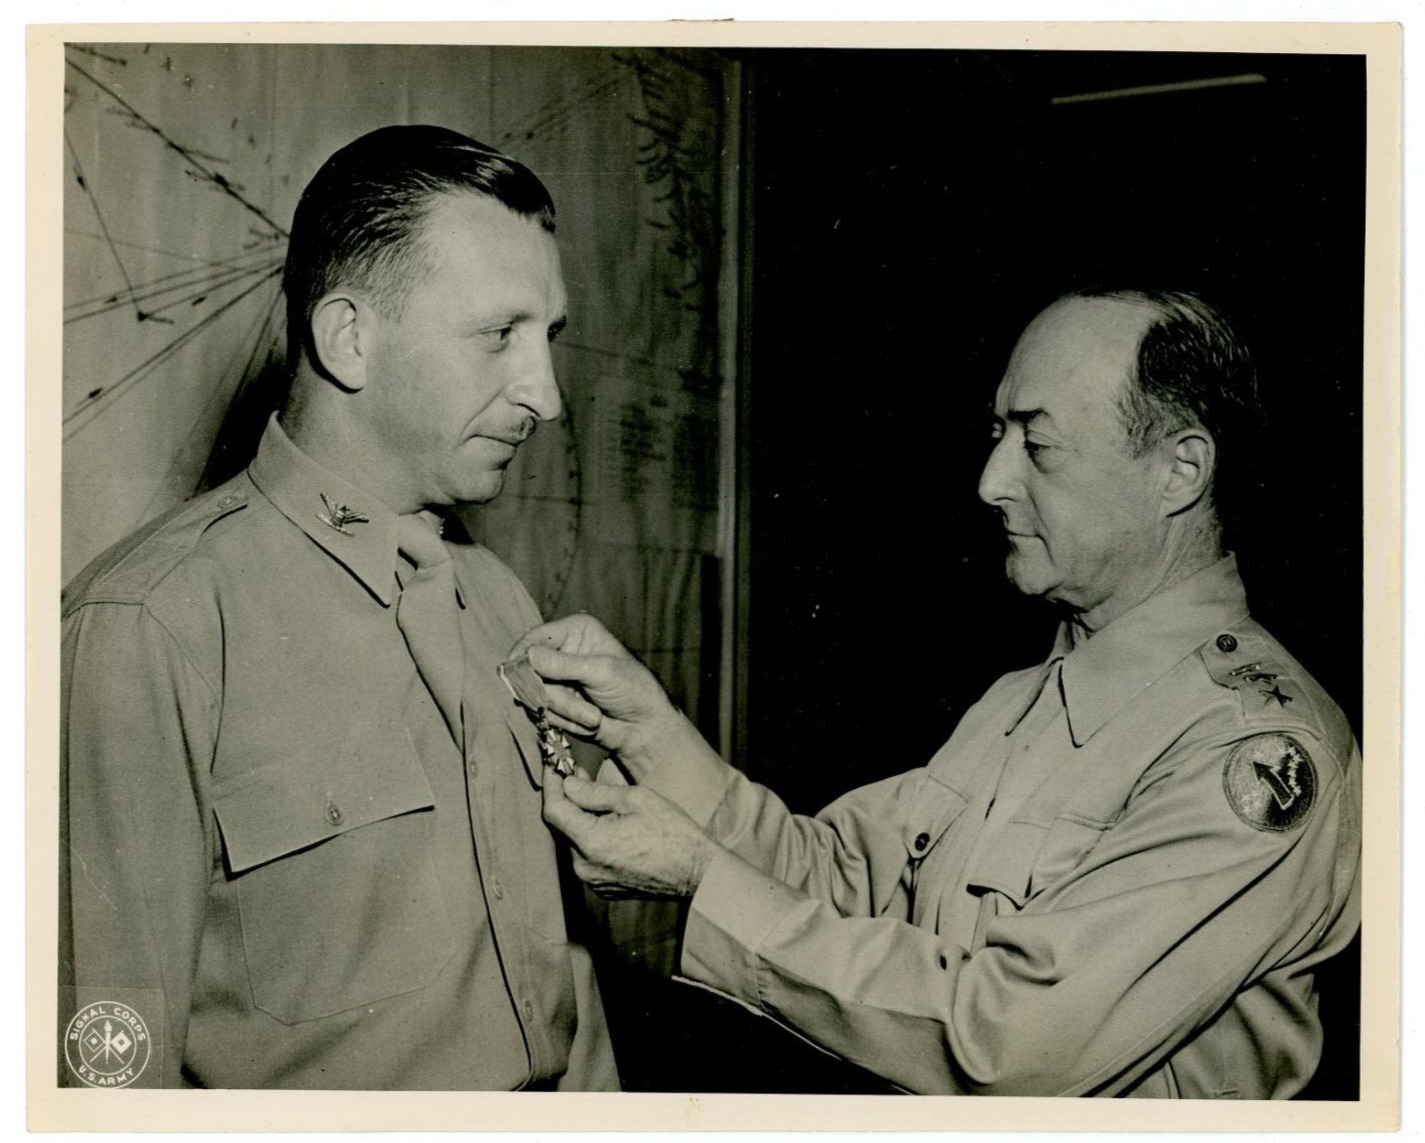 Photograph US Army Signal Corps LT Gen Richardson Pinning FT Shafter Oahu 1945